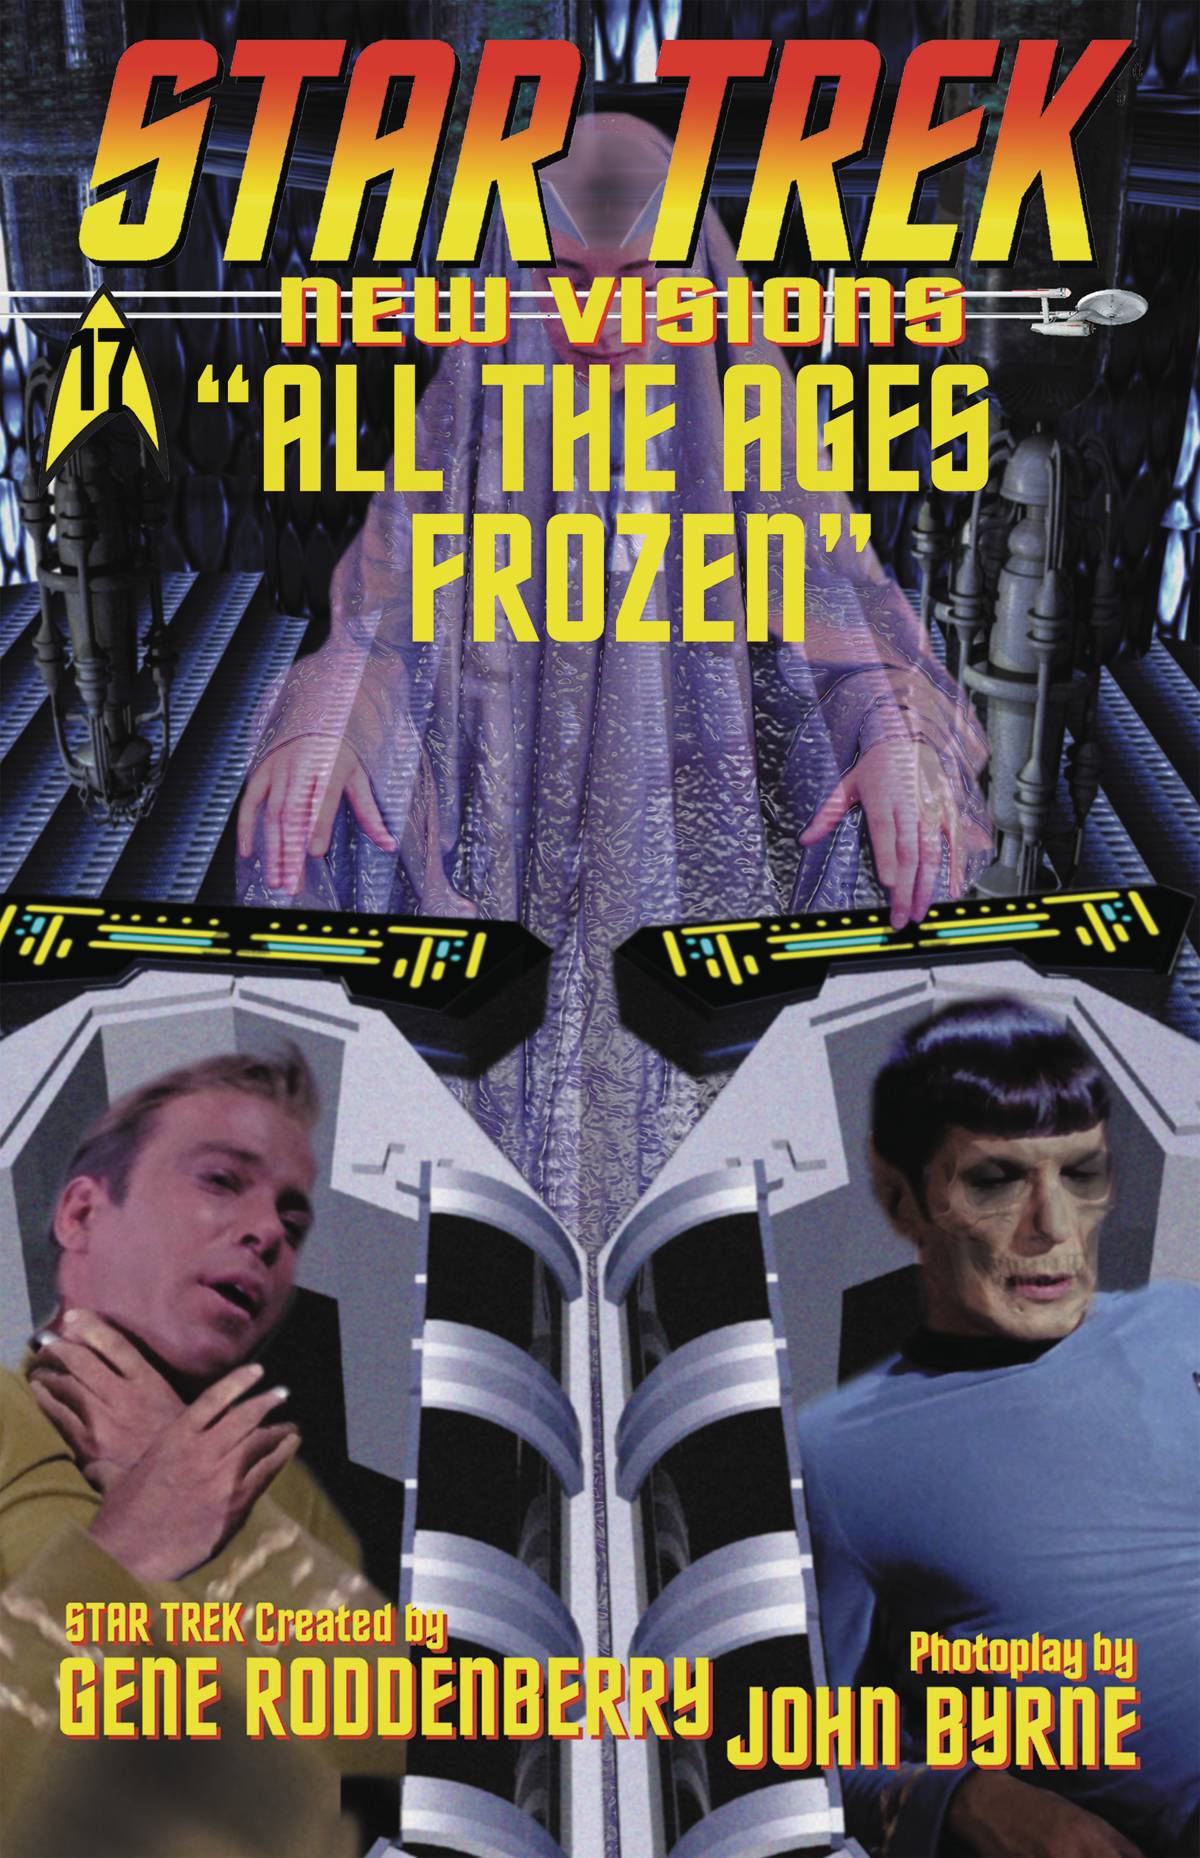 Star Trek New Visions All The Ages Frozen